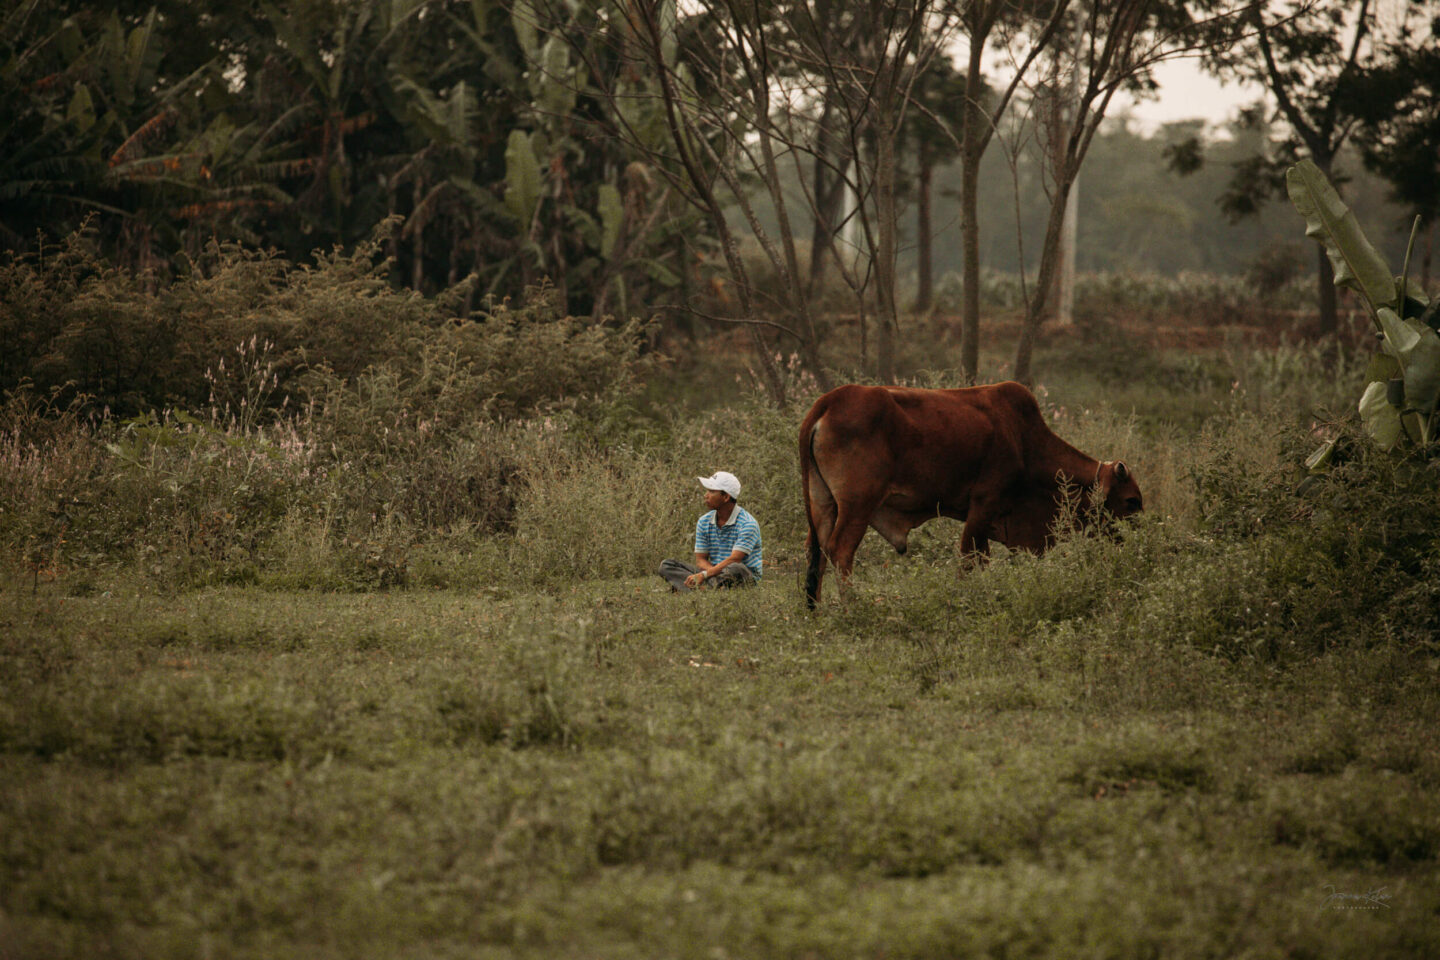 A cattle farmer takes a break from work in a village on the outskirts of Hoi An, Central Vietnam.